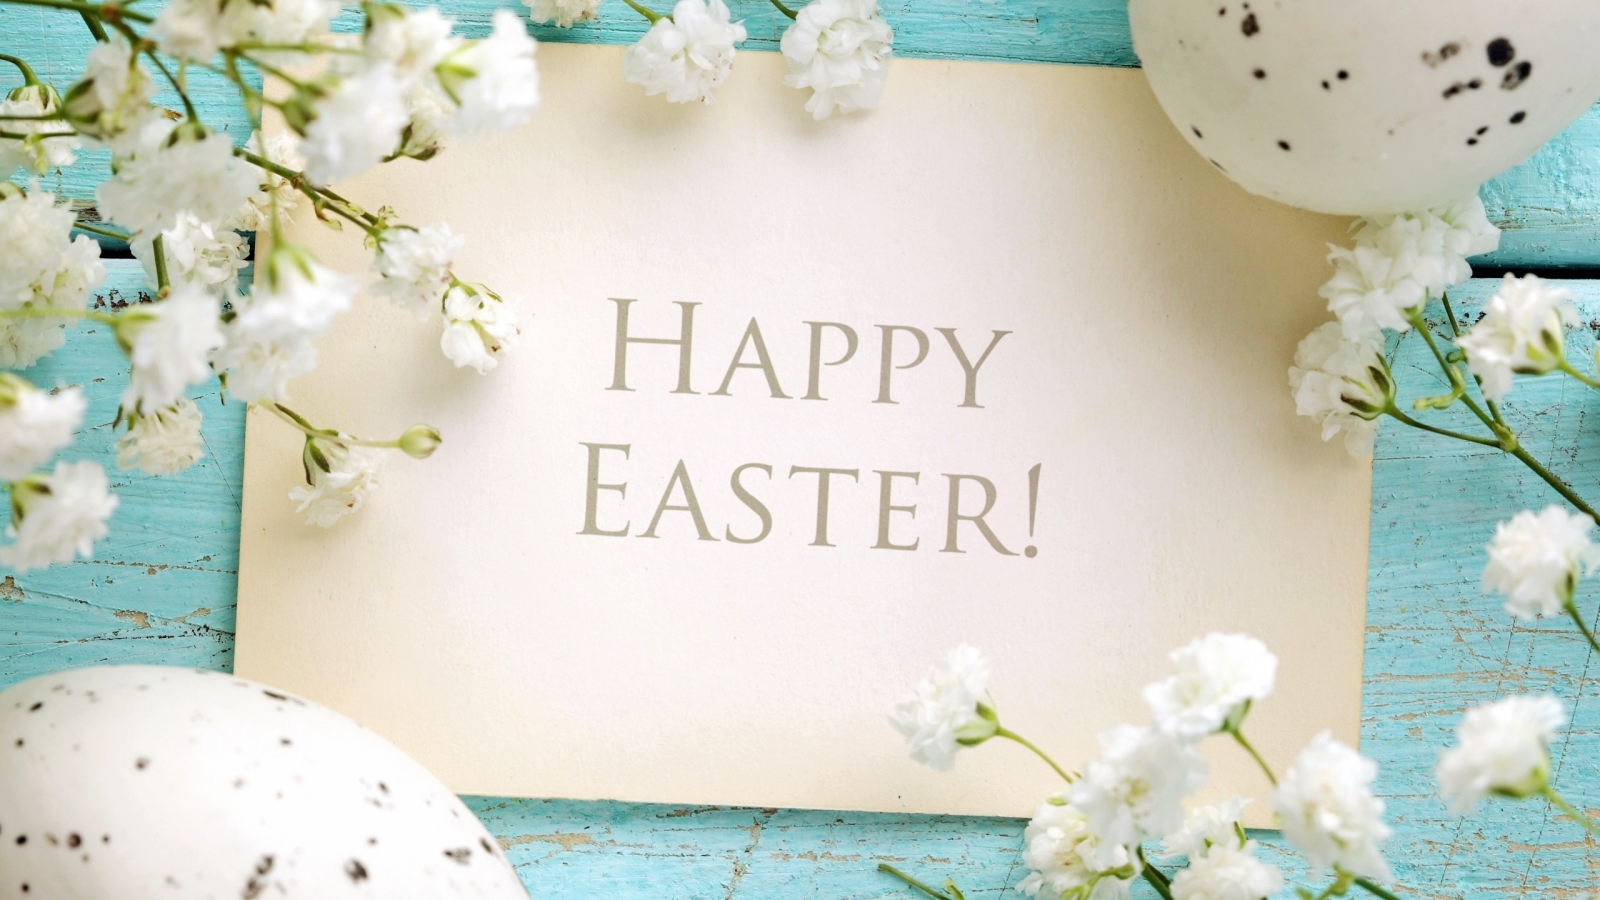 Happy Easter 2014 for 1600 x 900 HDTV resolution